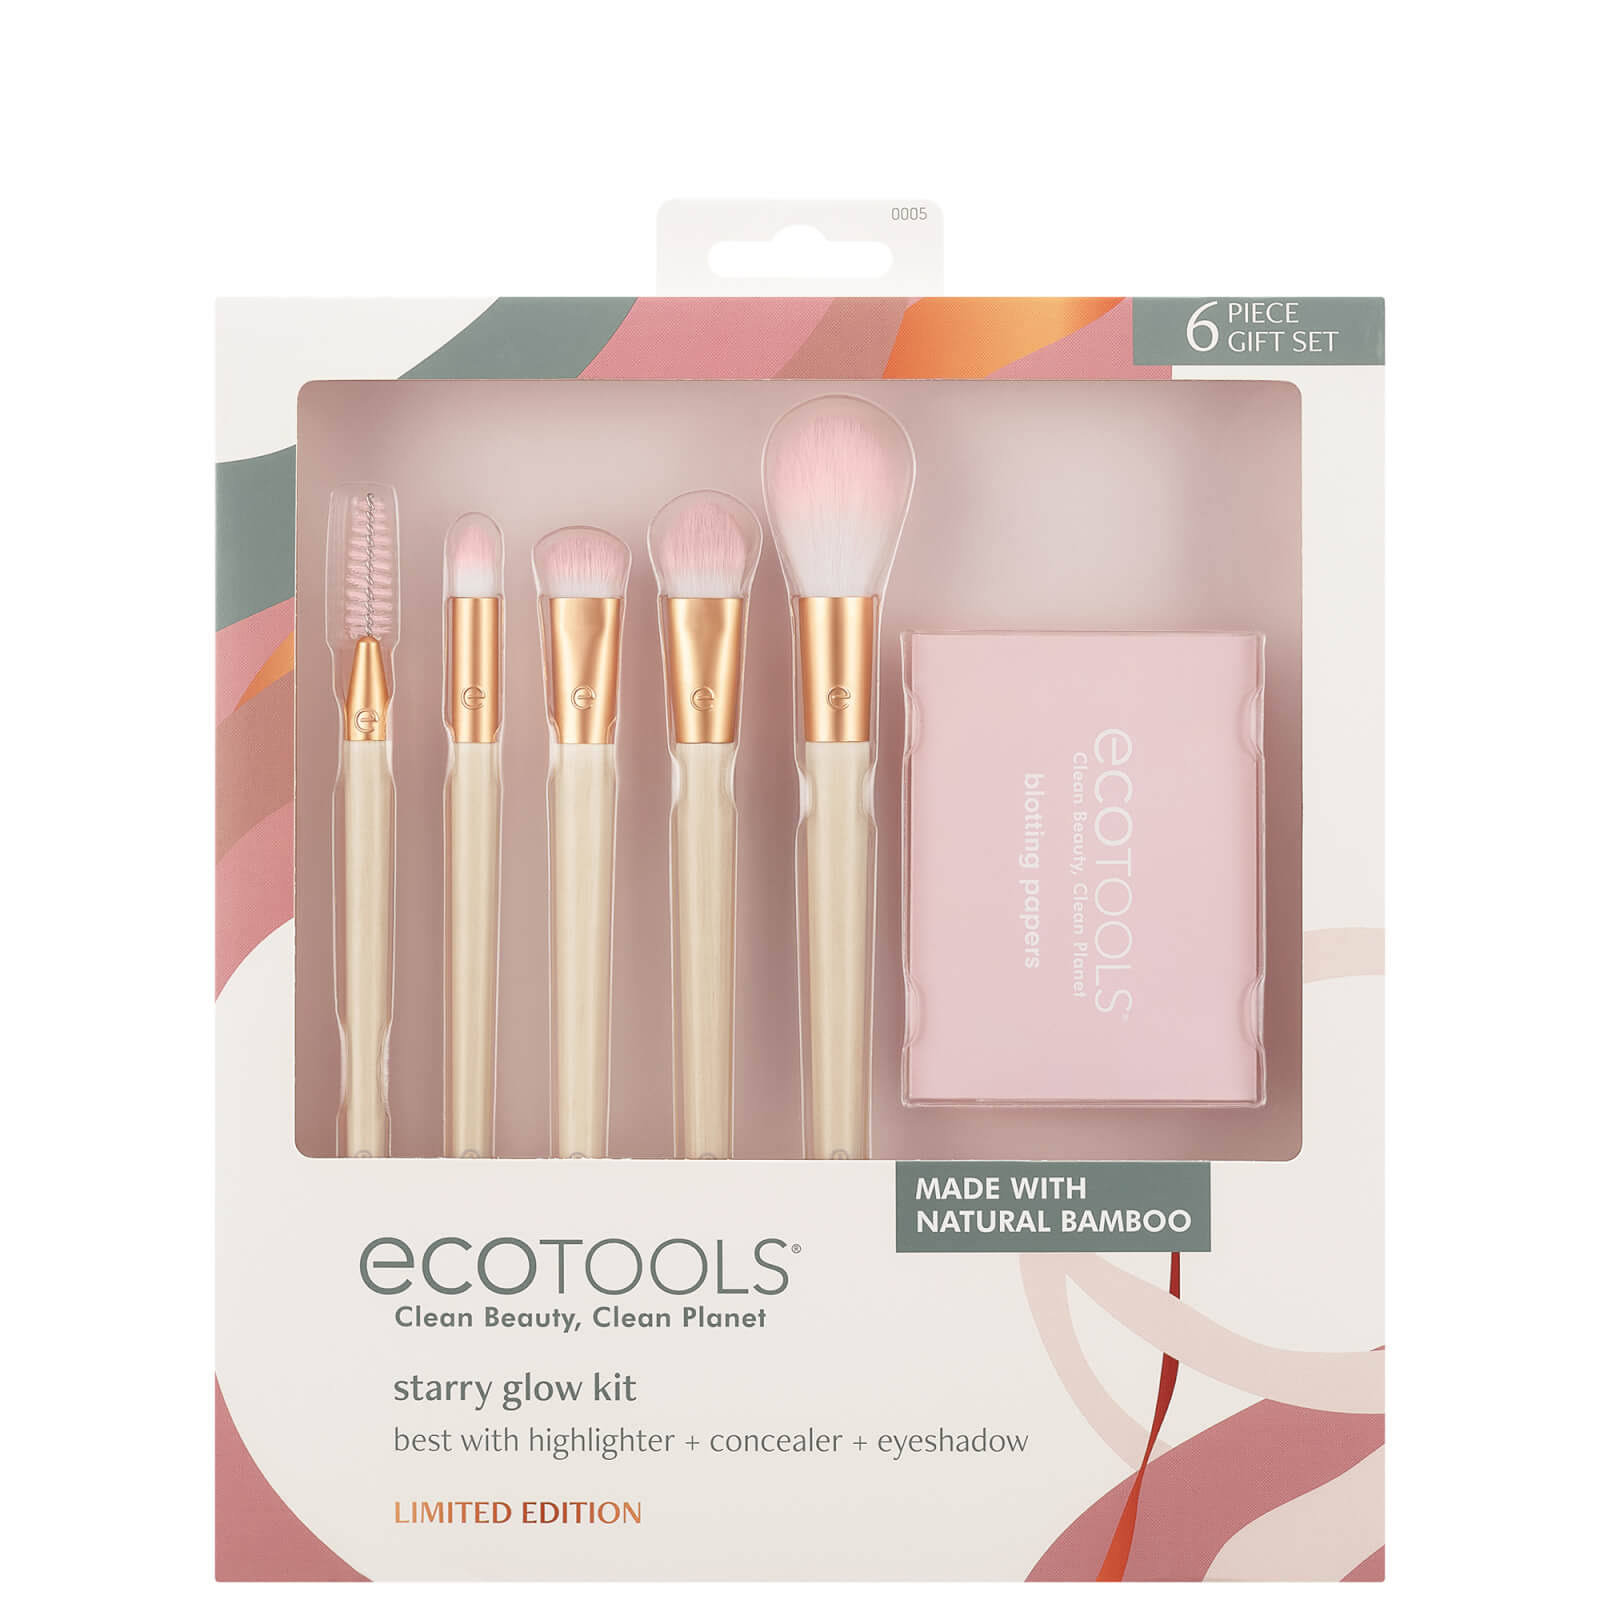 EcoTools, Starry Glow Brush Kit, Limited Edition, 6 Piece Gift Set